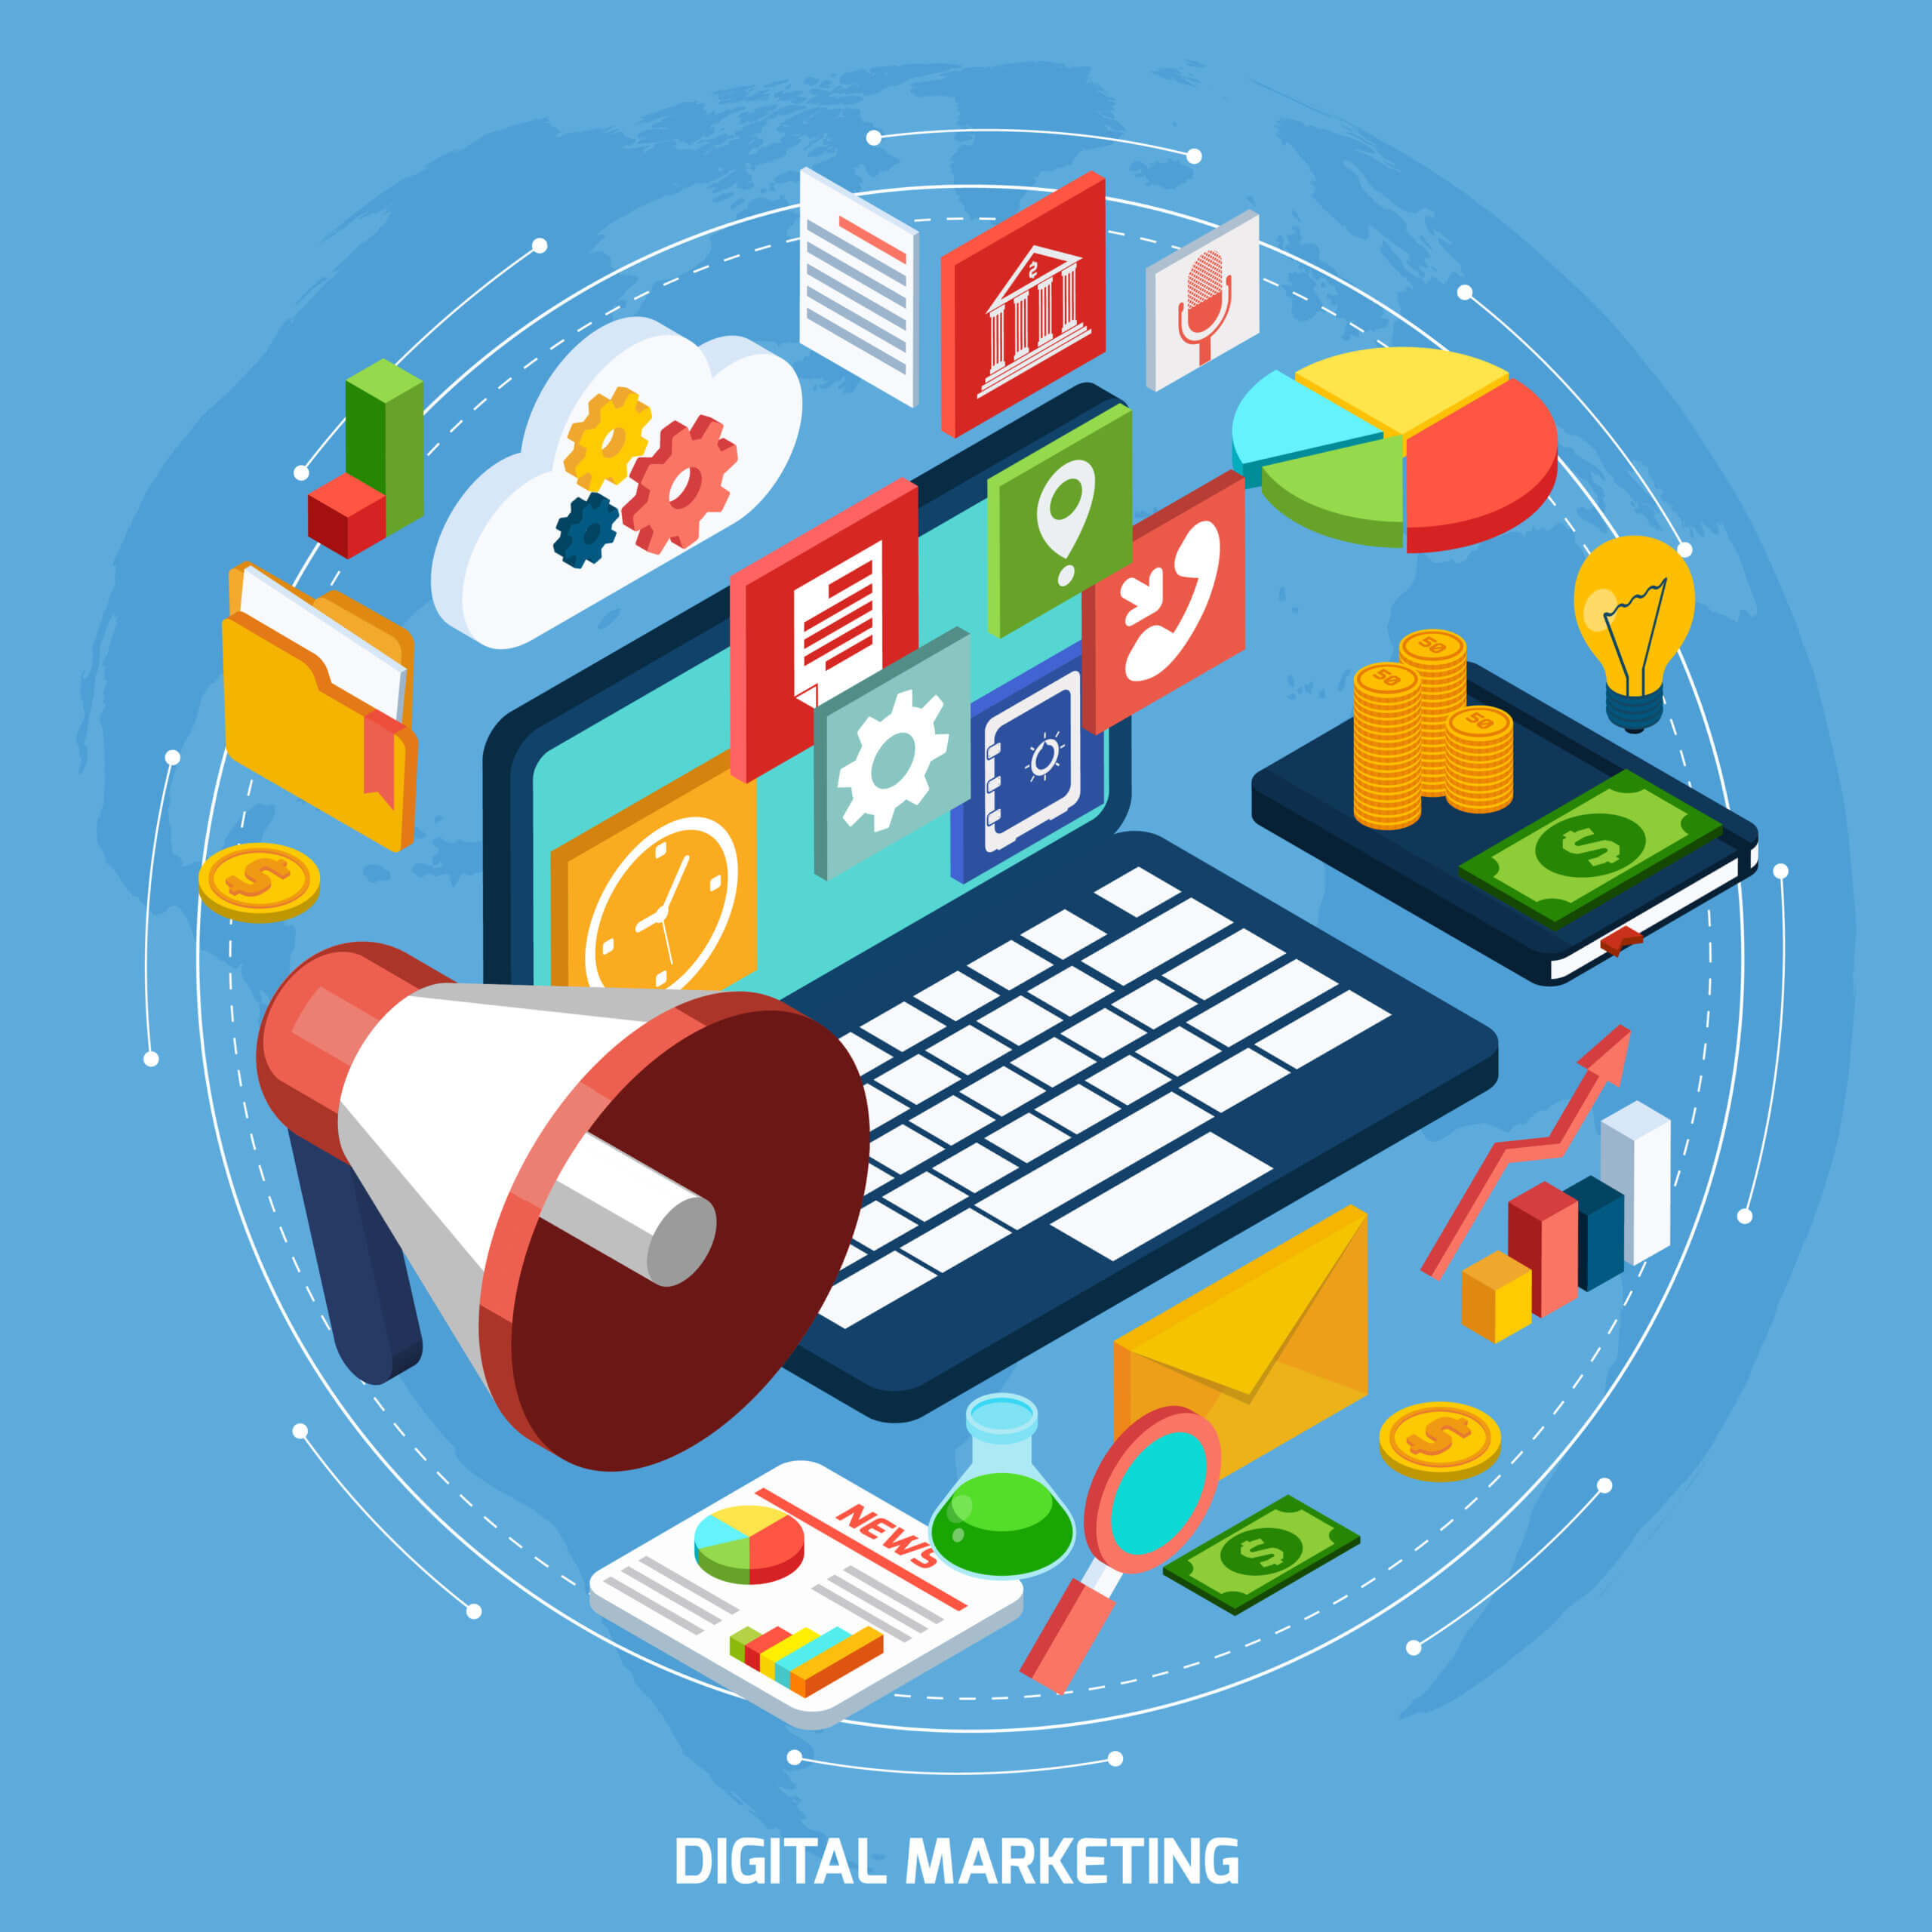 Kaptaan Business Solutions Digital Marketing Services and Advertisement services